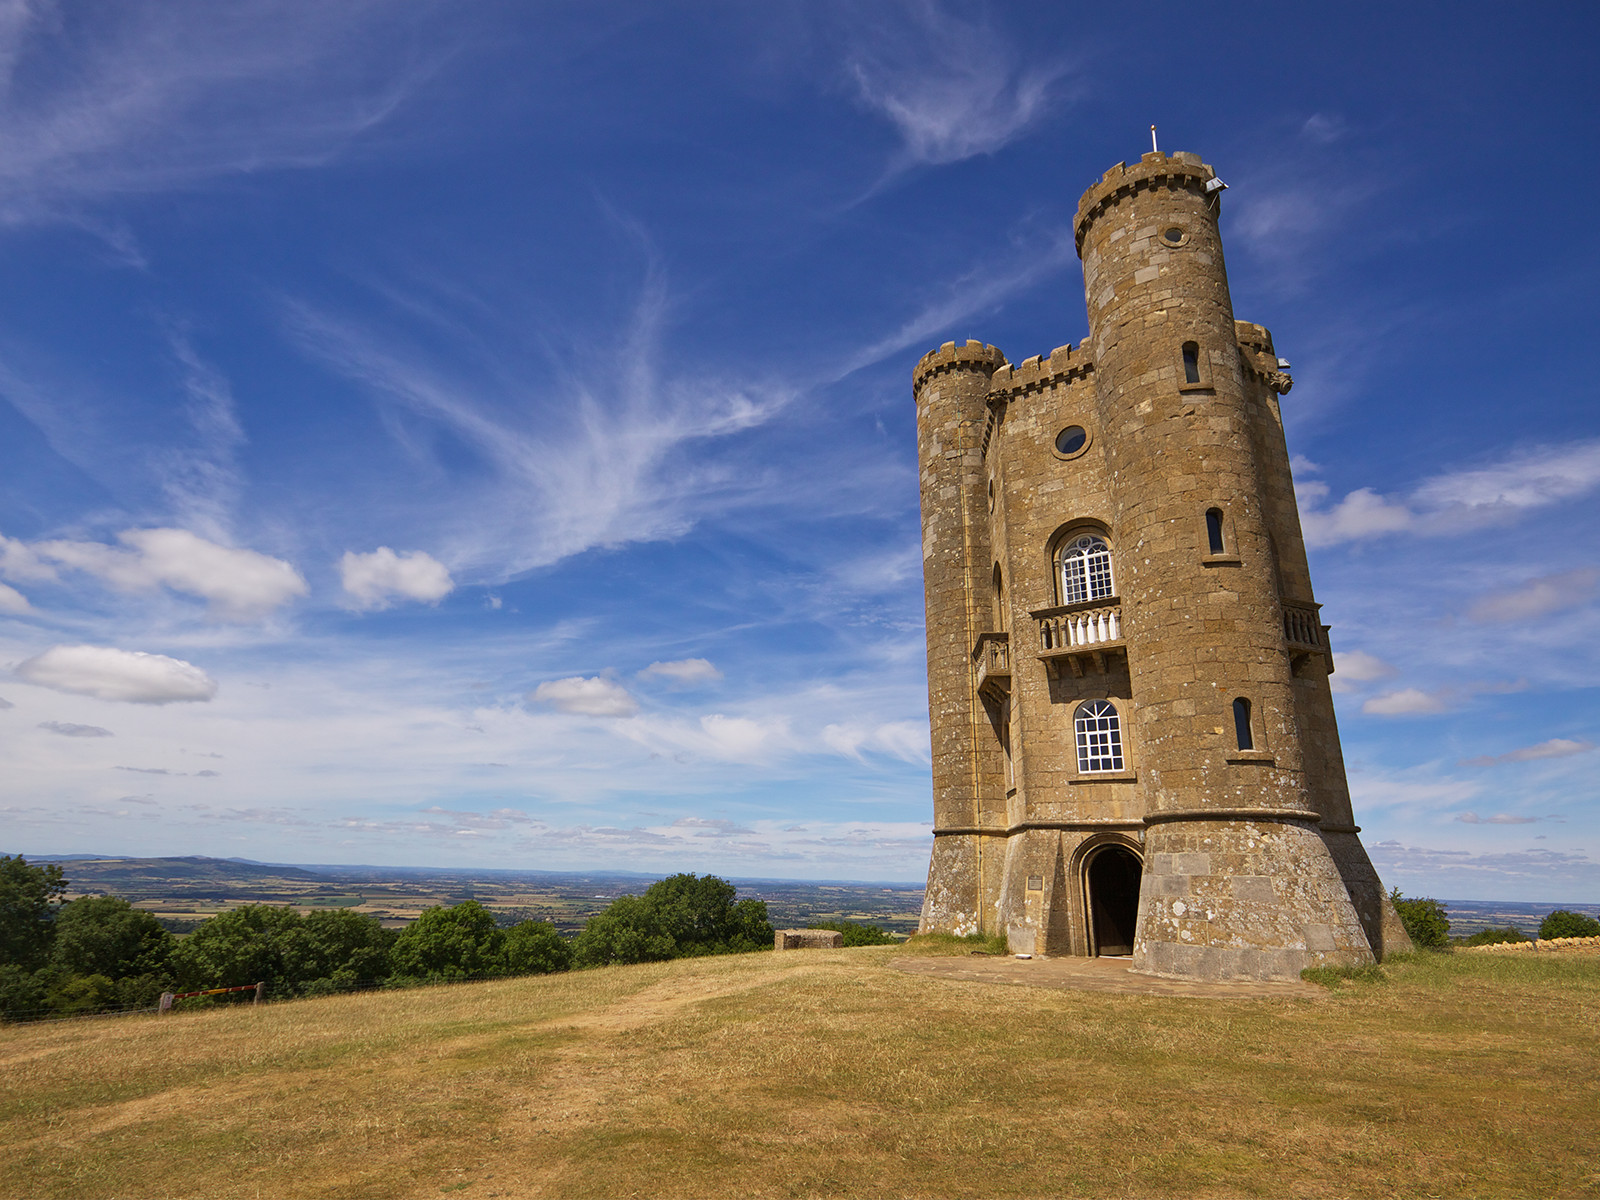 Broadway Tower is a short driving distance from Evenlode Grounds Farm